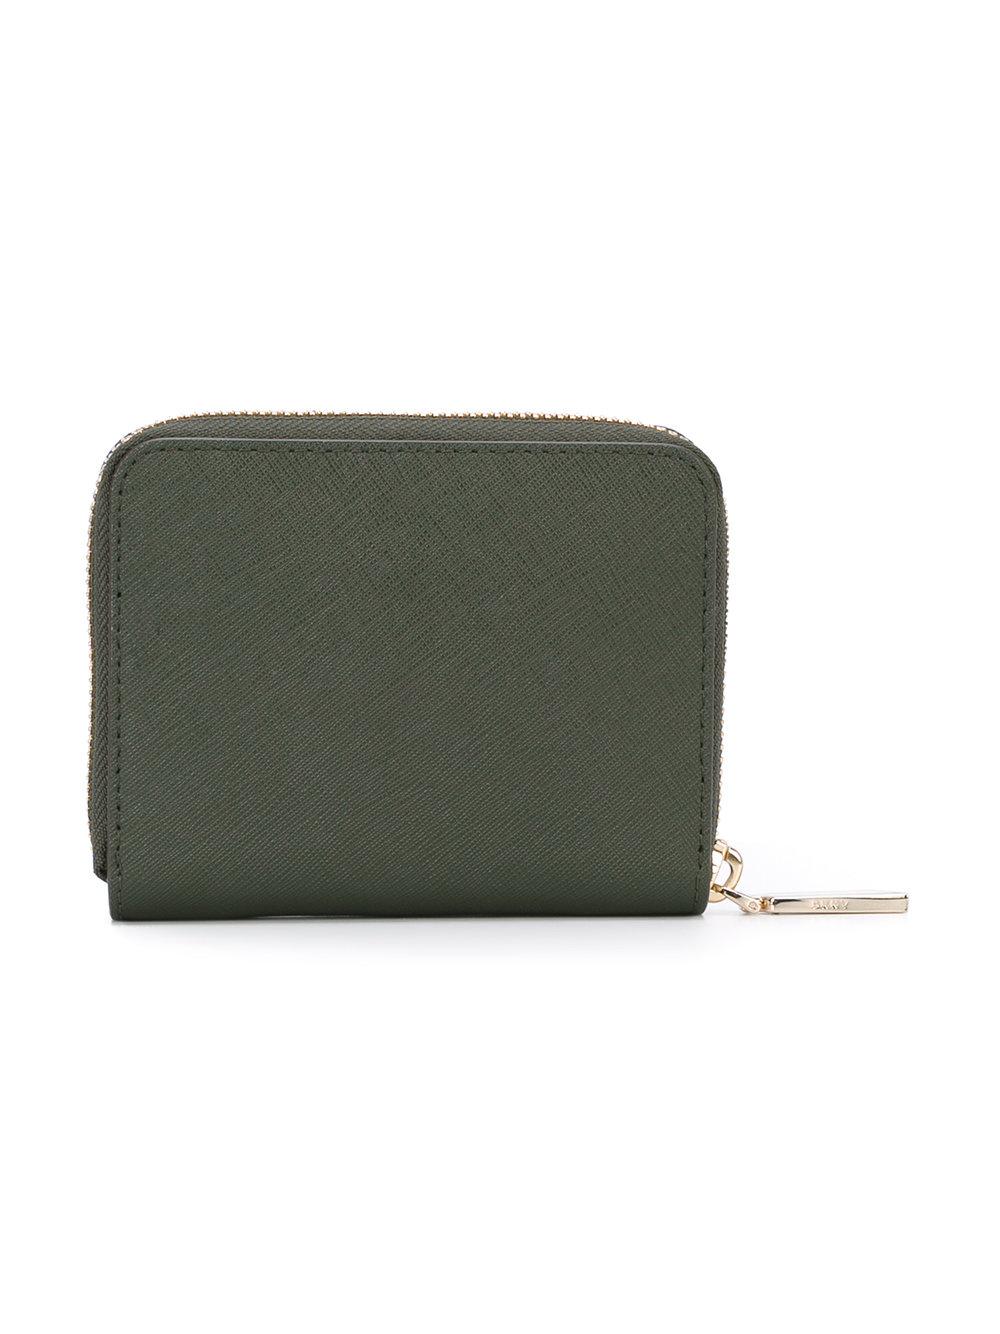 DKNY Leather Small Carryall Wallet in Green - Lyst